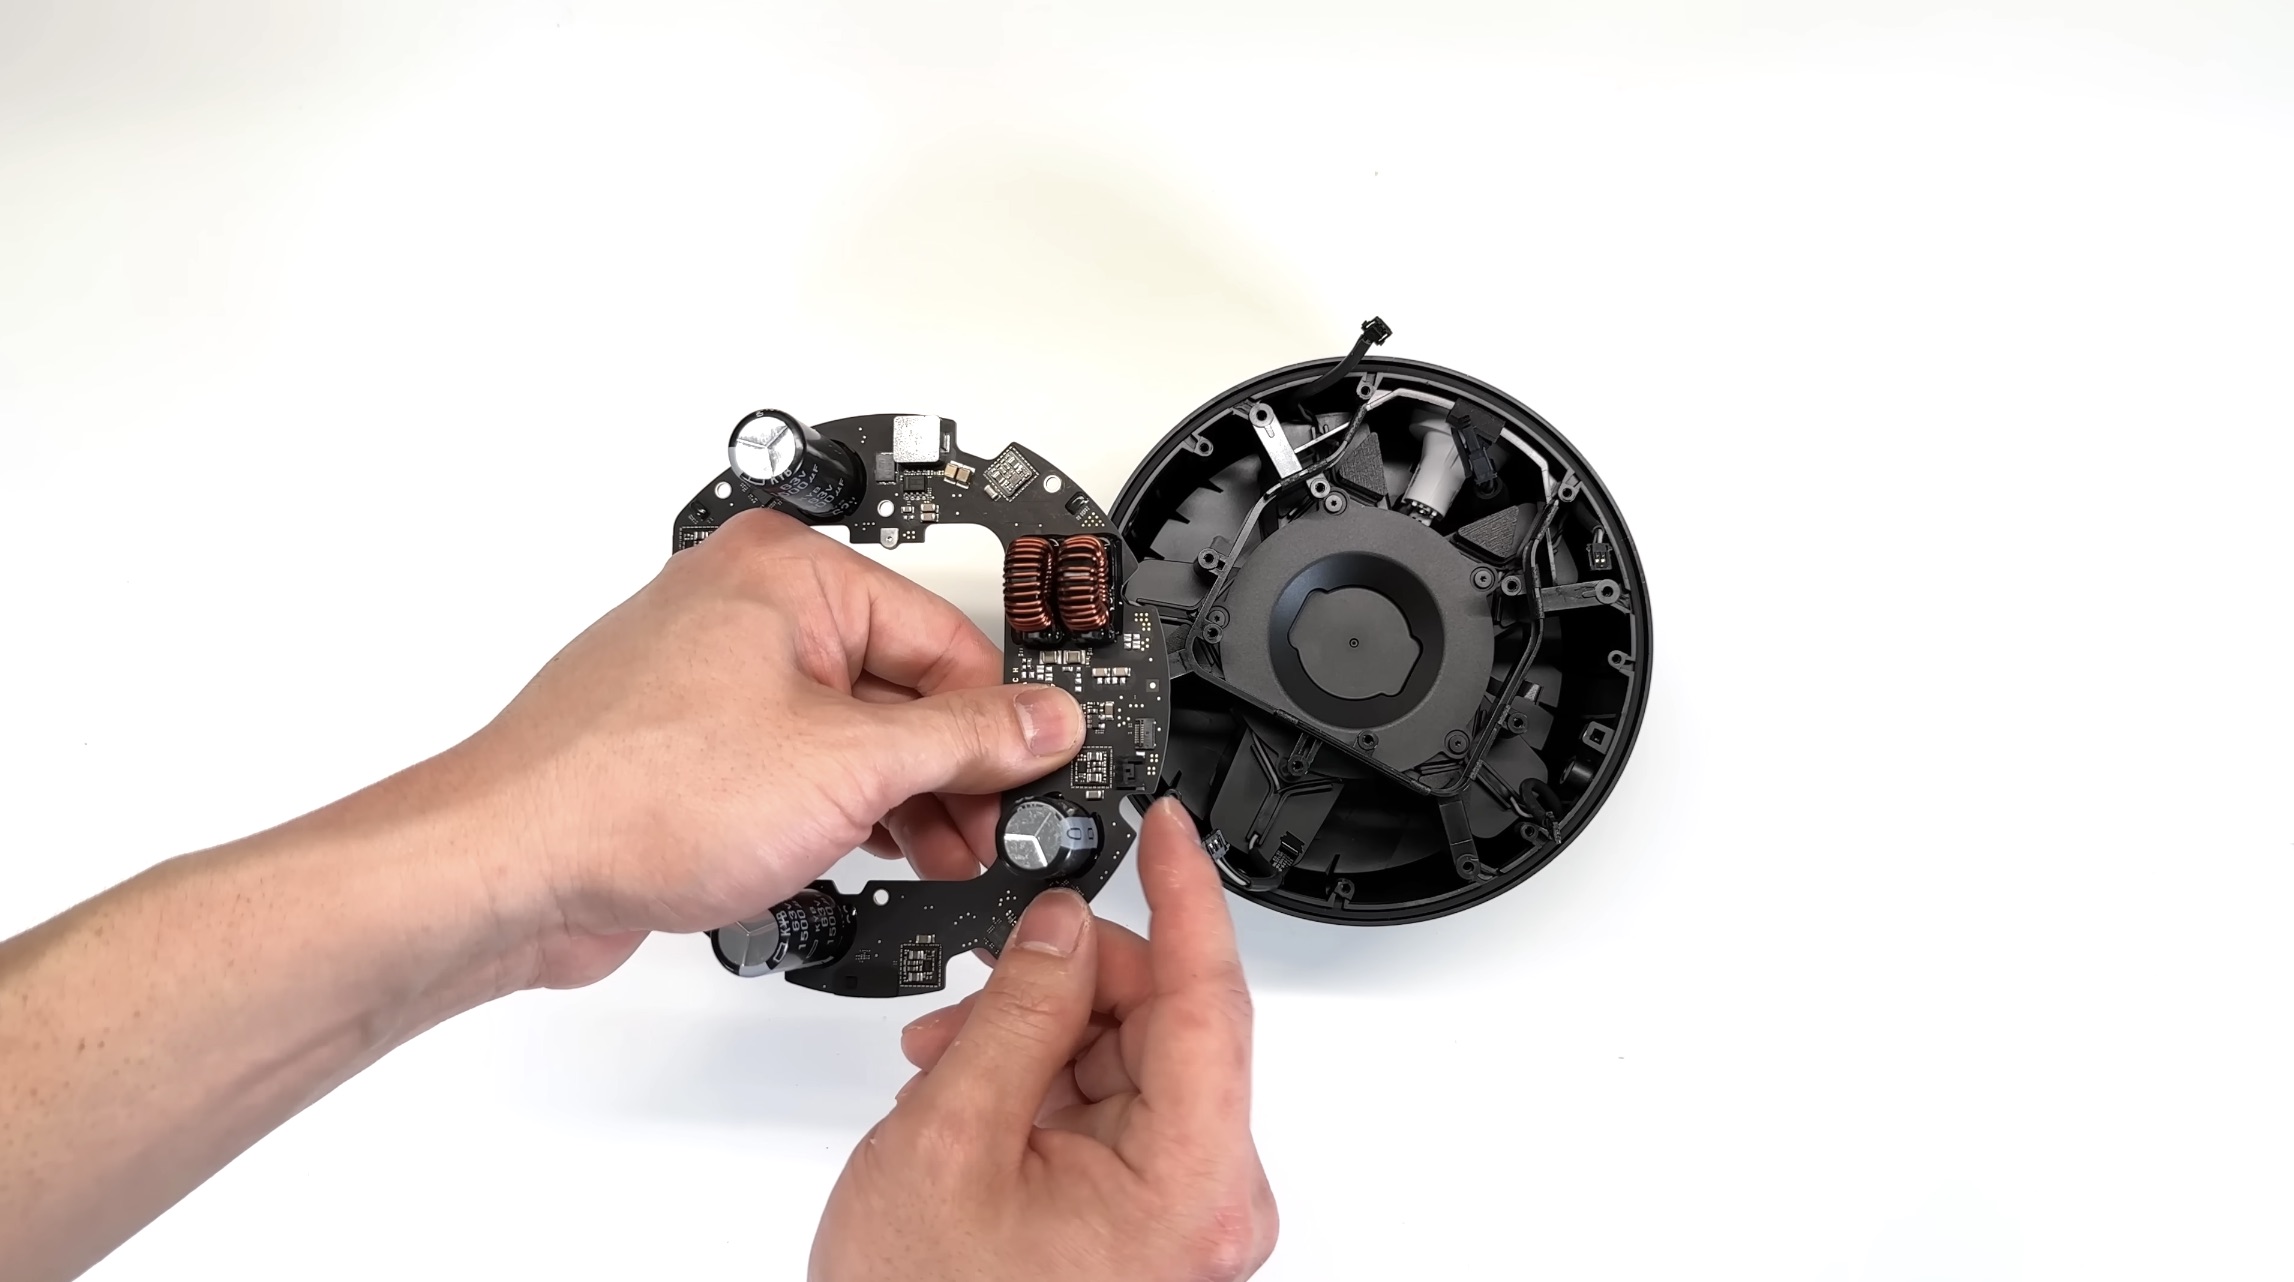 HomePod 2 teardown shows what's different compared to the 2018 model